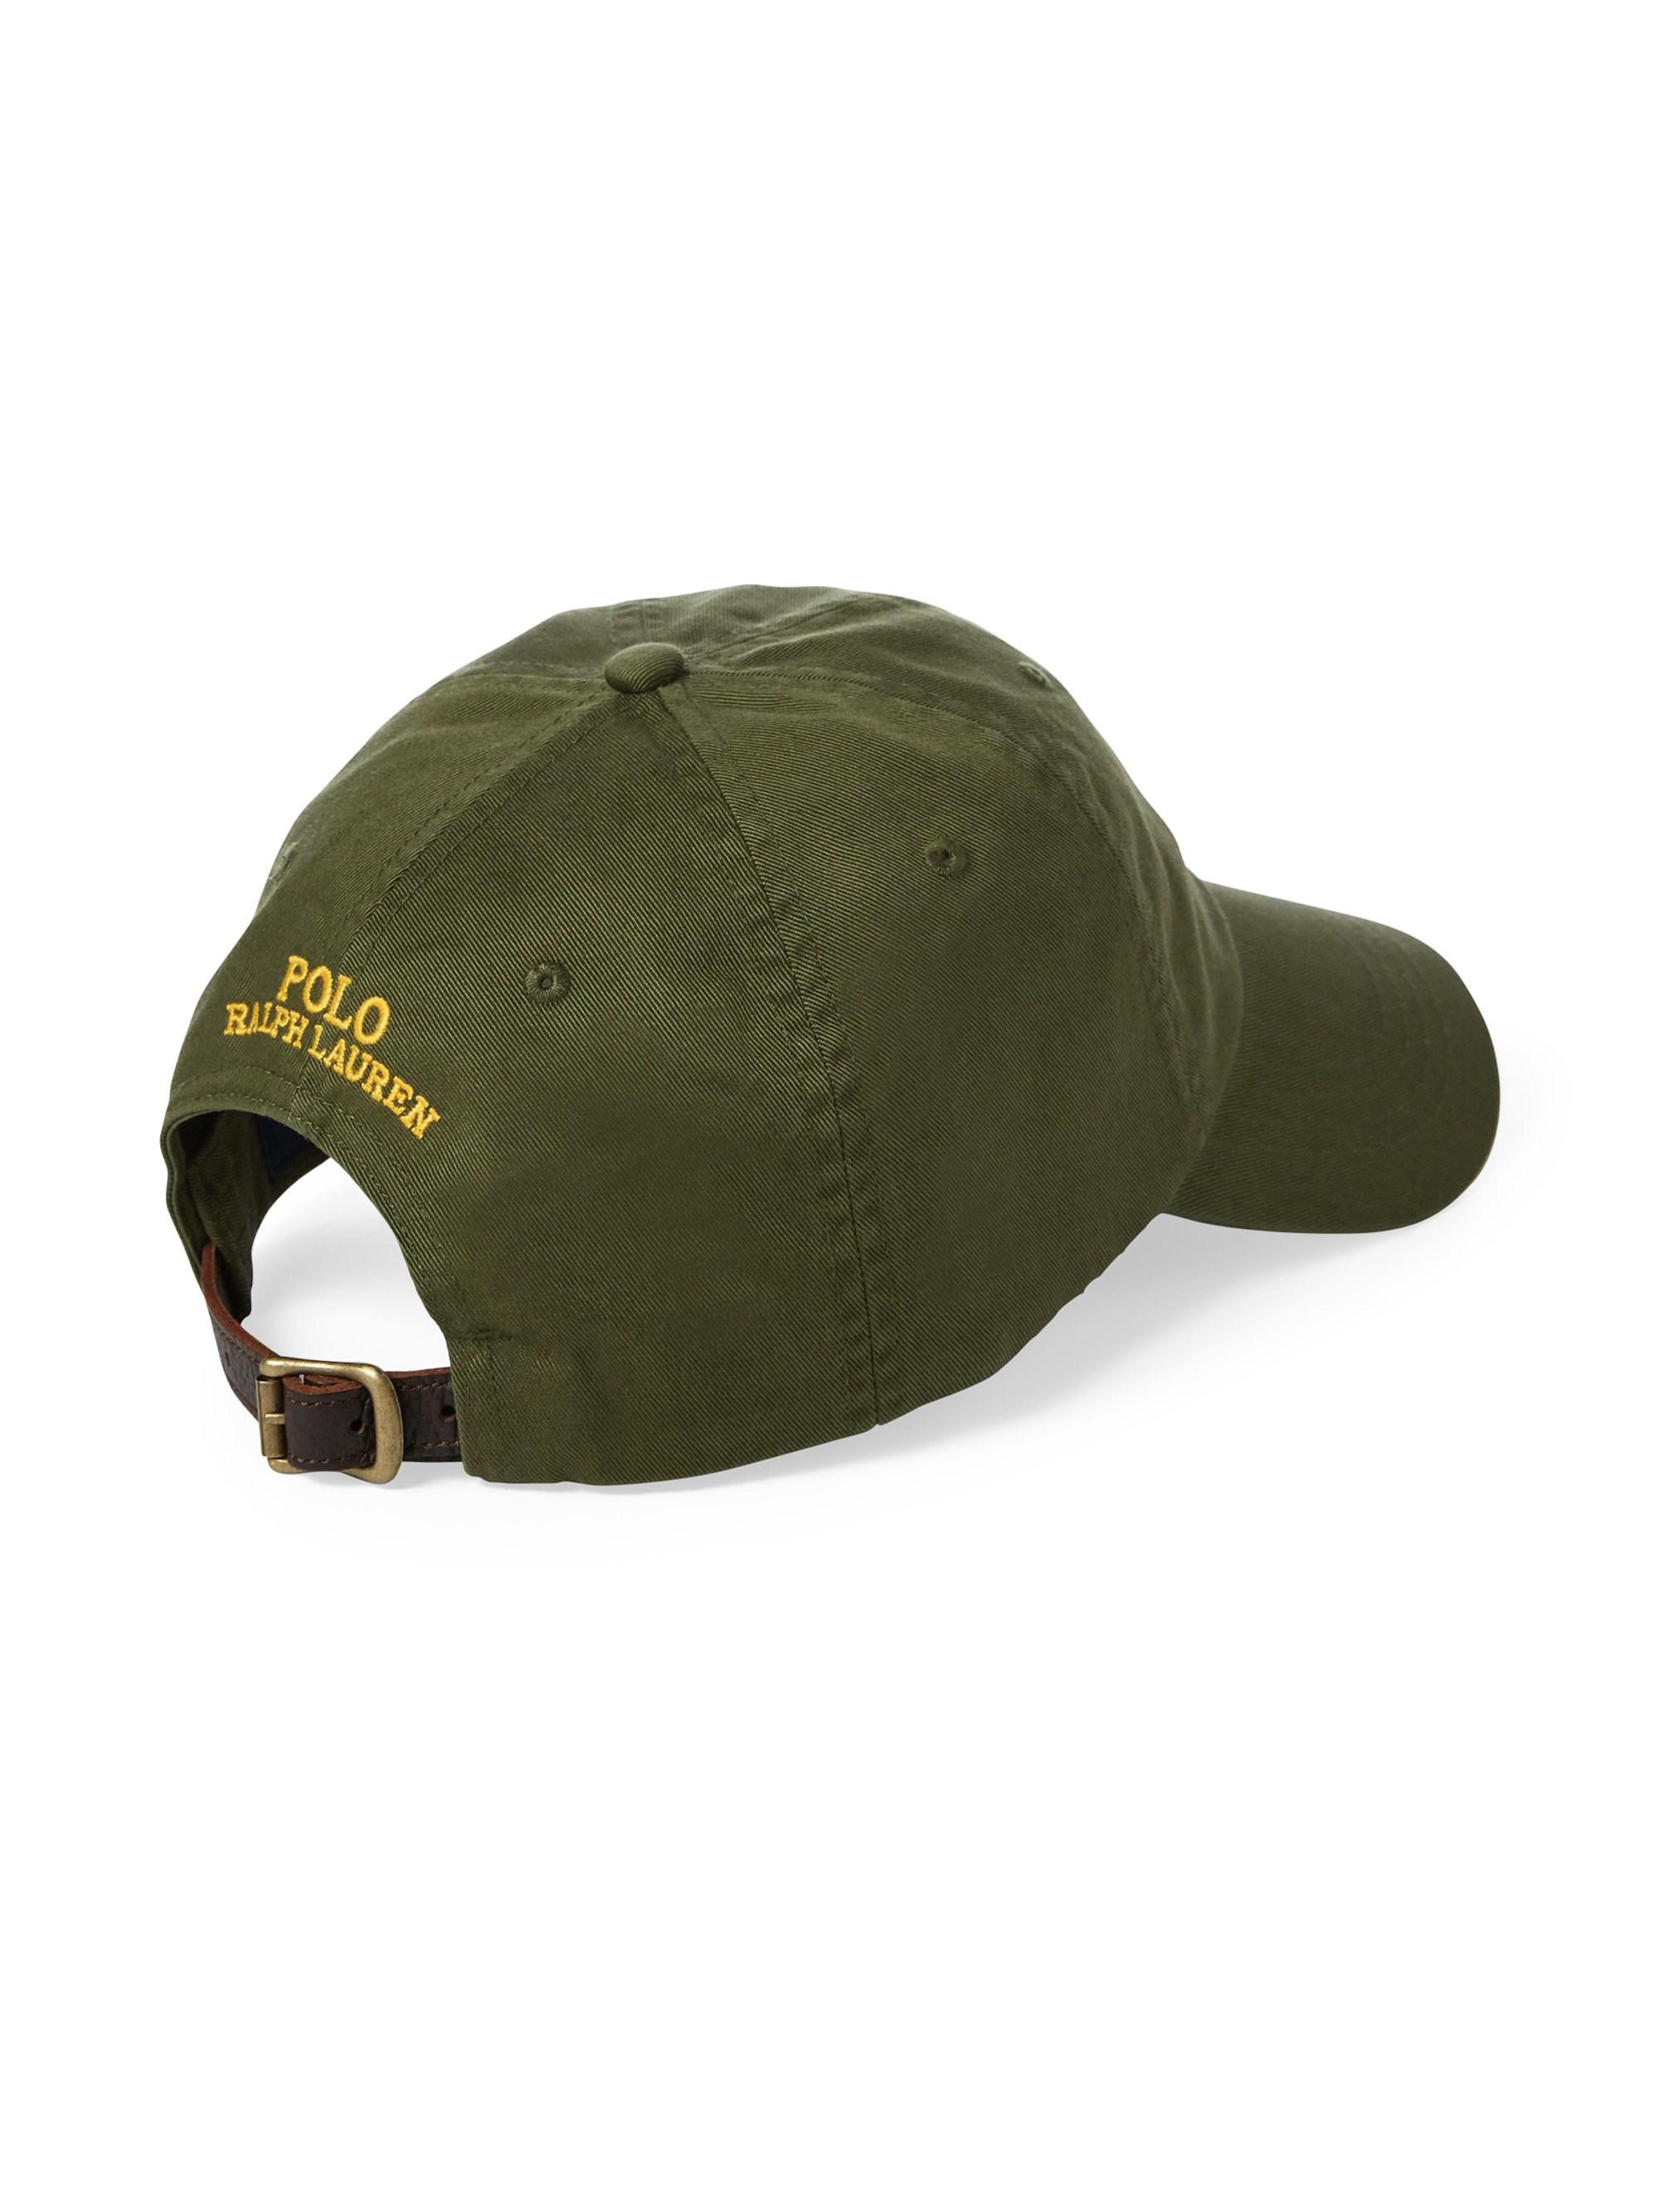 Polo Ralph Lauren Cotton Great Outdoors Polo Bear Baseball Cap in Olive  (Green) for Men - Lyst